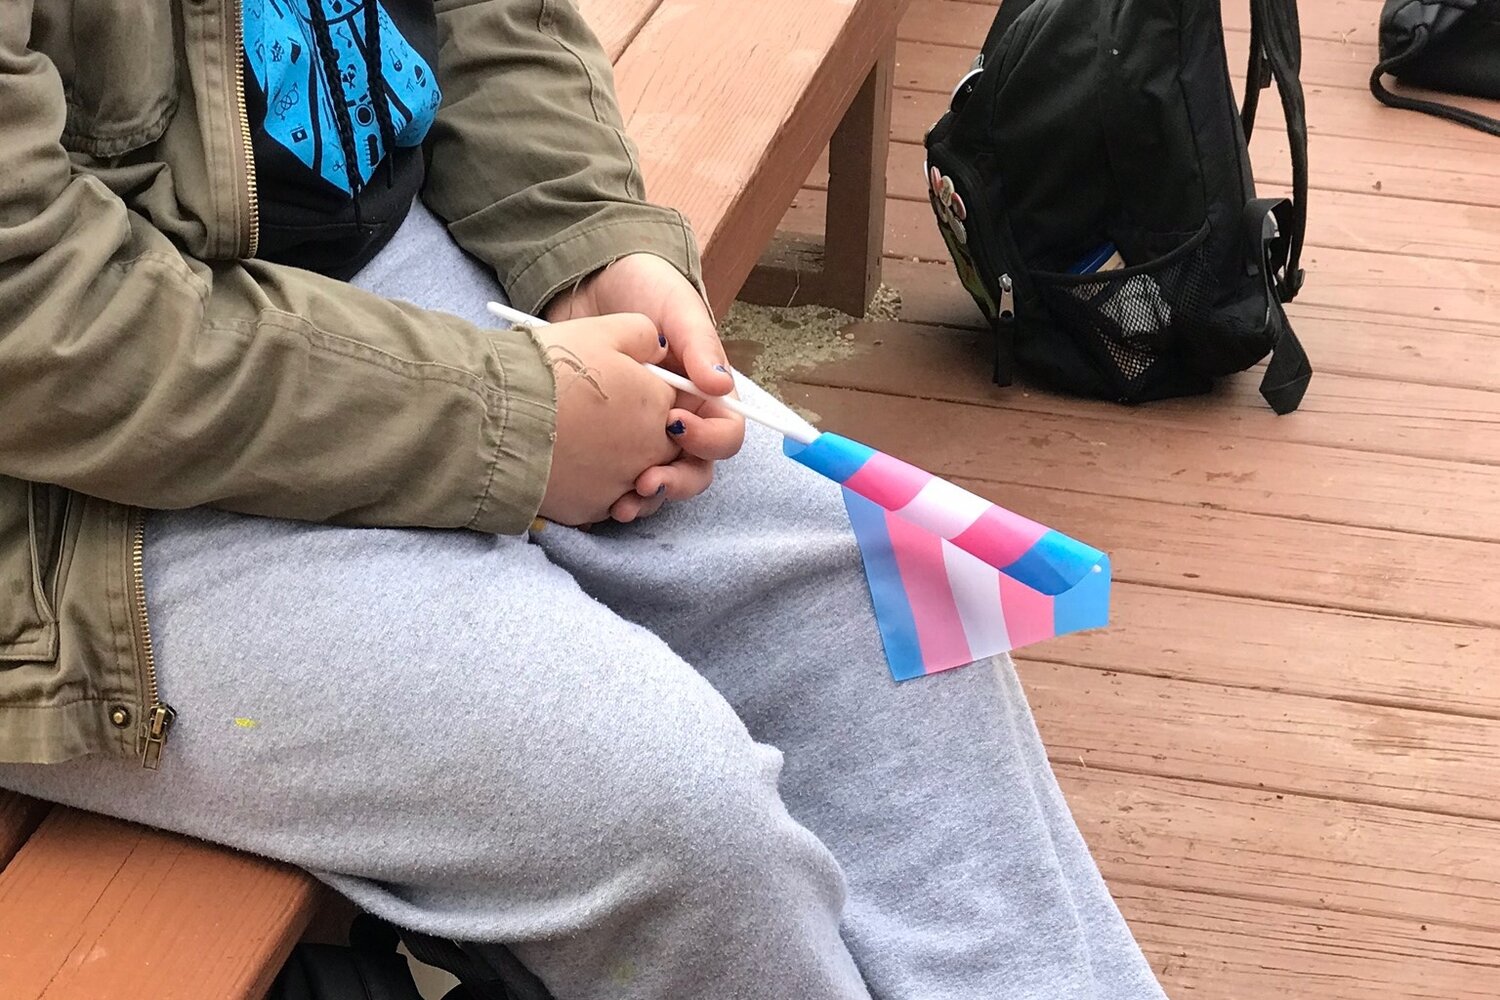  The bottom half of a teen wearing sweatpants and a green khaki sweater is seen holding the trans flag with both their hands. 